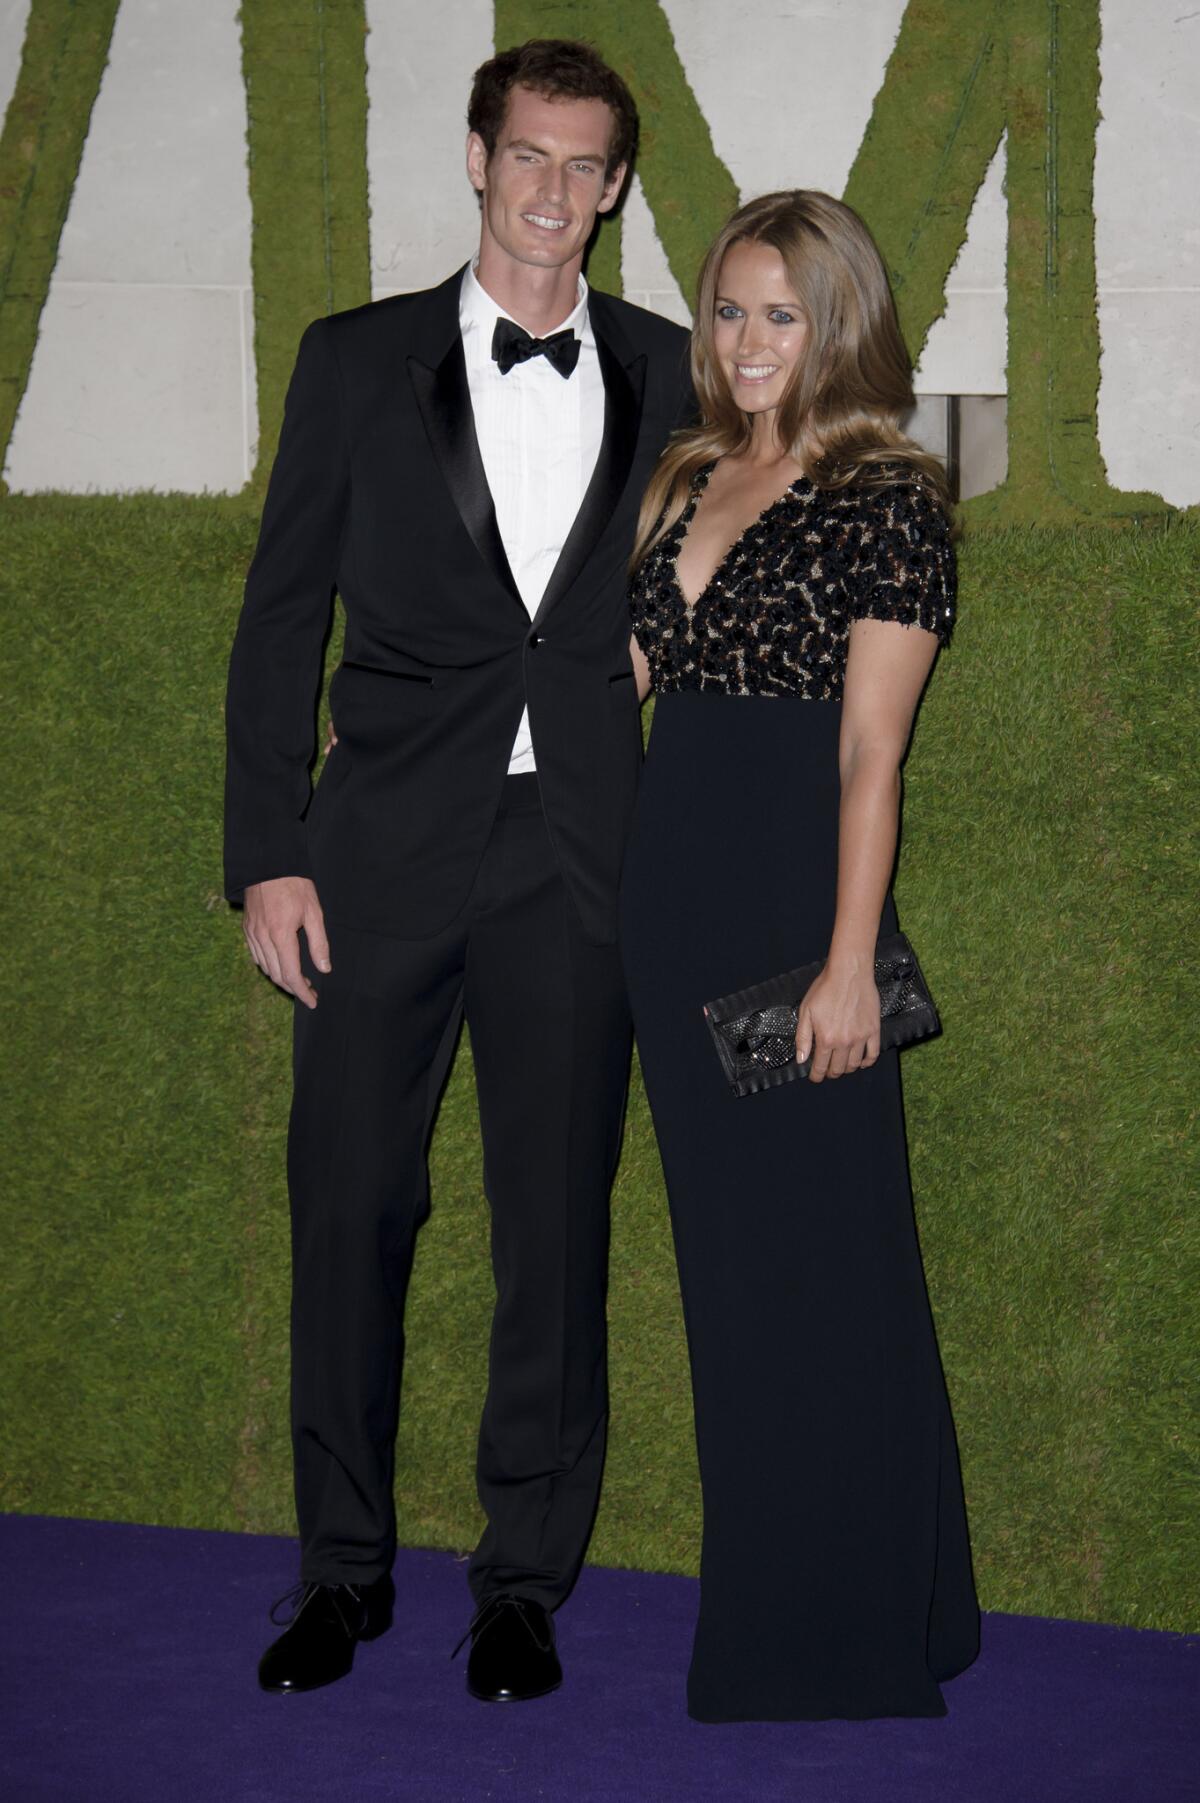 Andy Murray and Kim Sears wear Burberry as they arrive for the Wimbledon Champions' Dinner in London on Sunday.